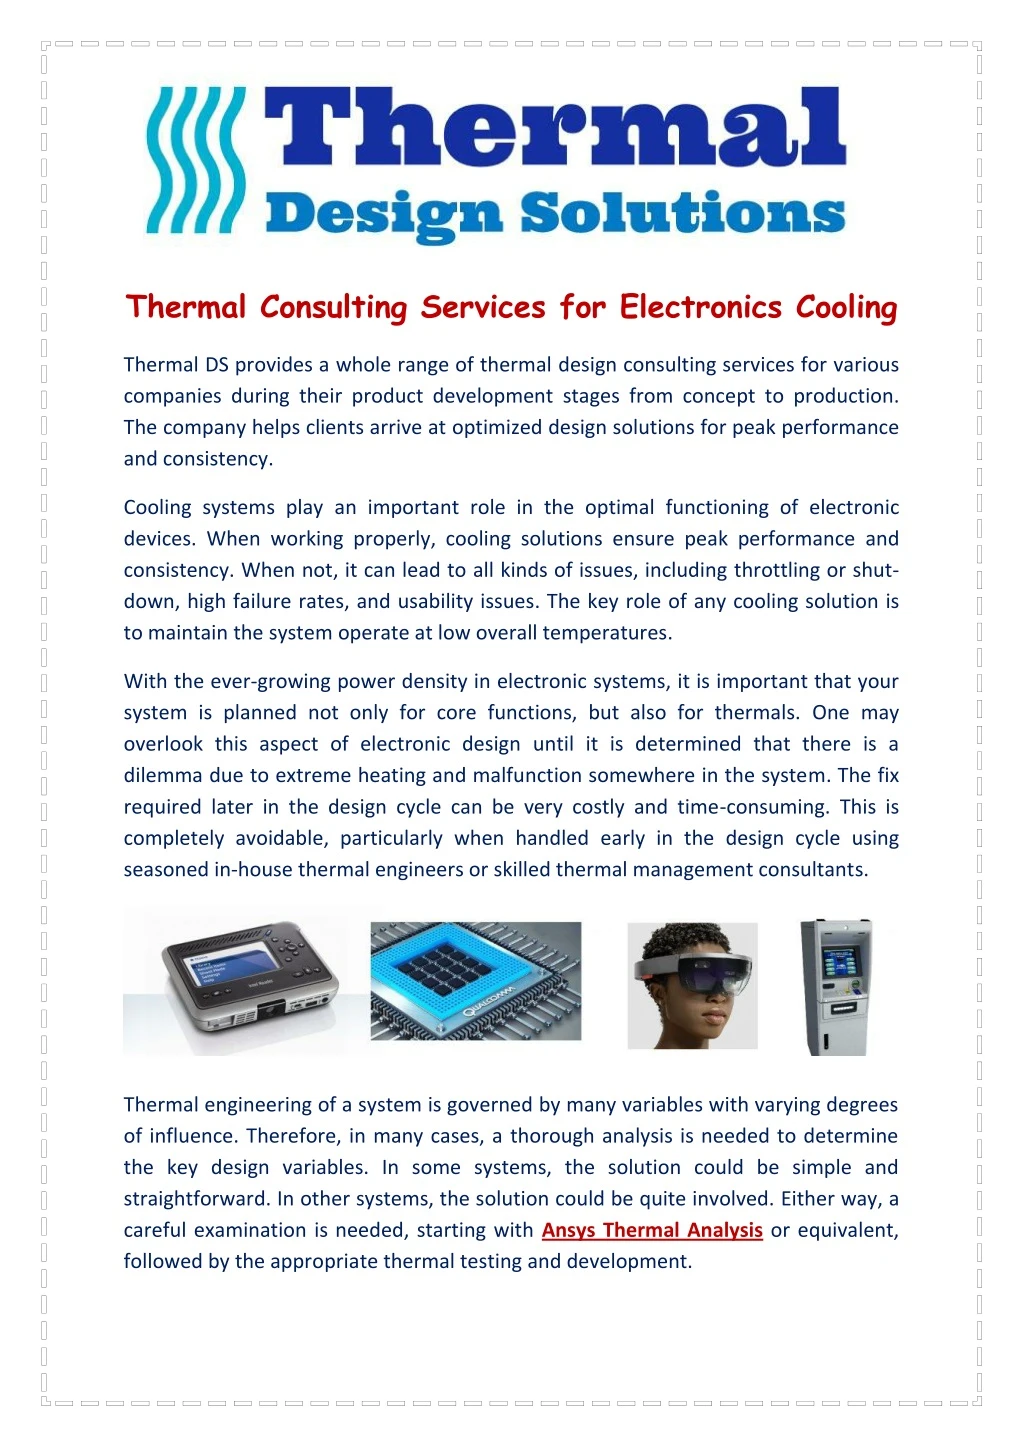 thermal consulting services for electronics